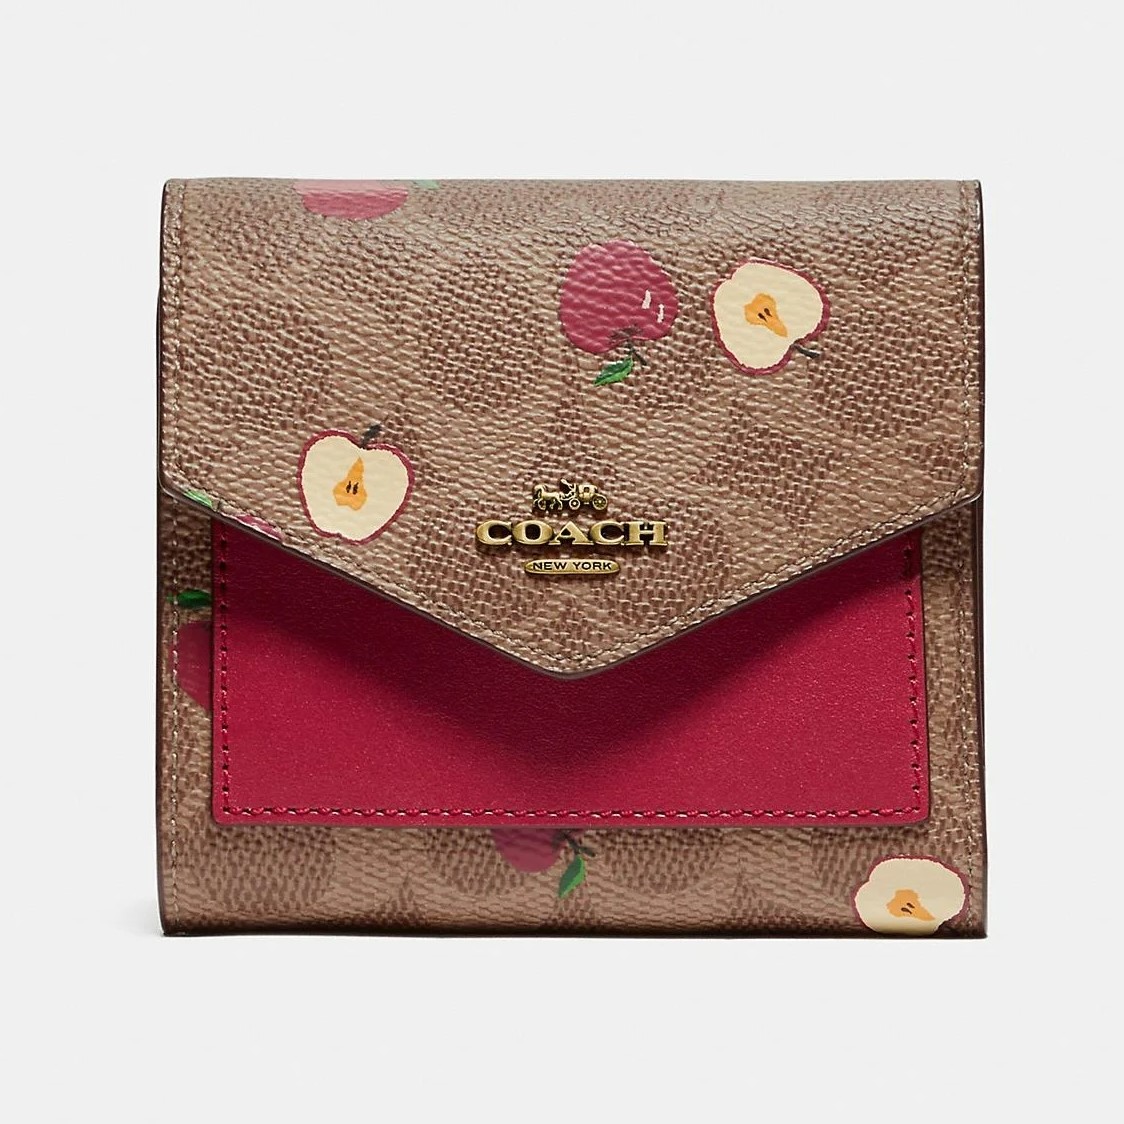 VÍ NGẮN NỮ COACH TRÁI TÁO SMALL WALLET IN SIGNATURE CANVAS WITH SCATTERED APPLE PRINT 3